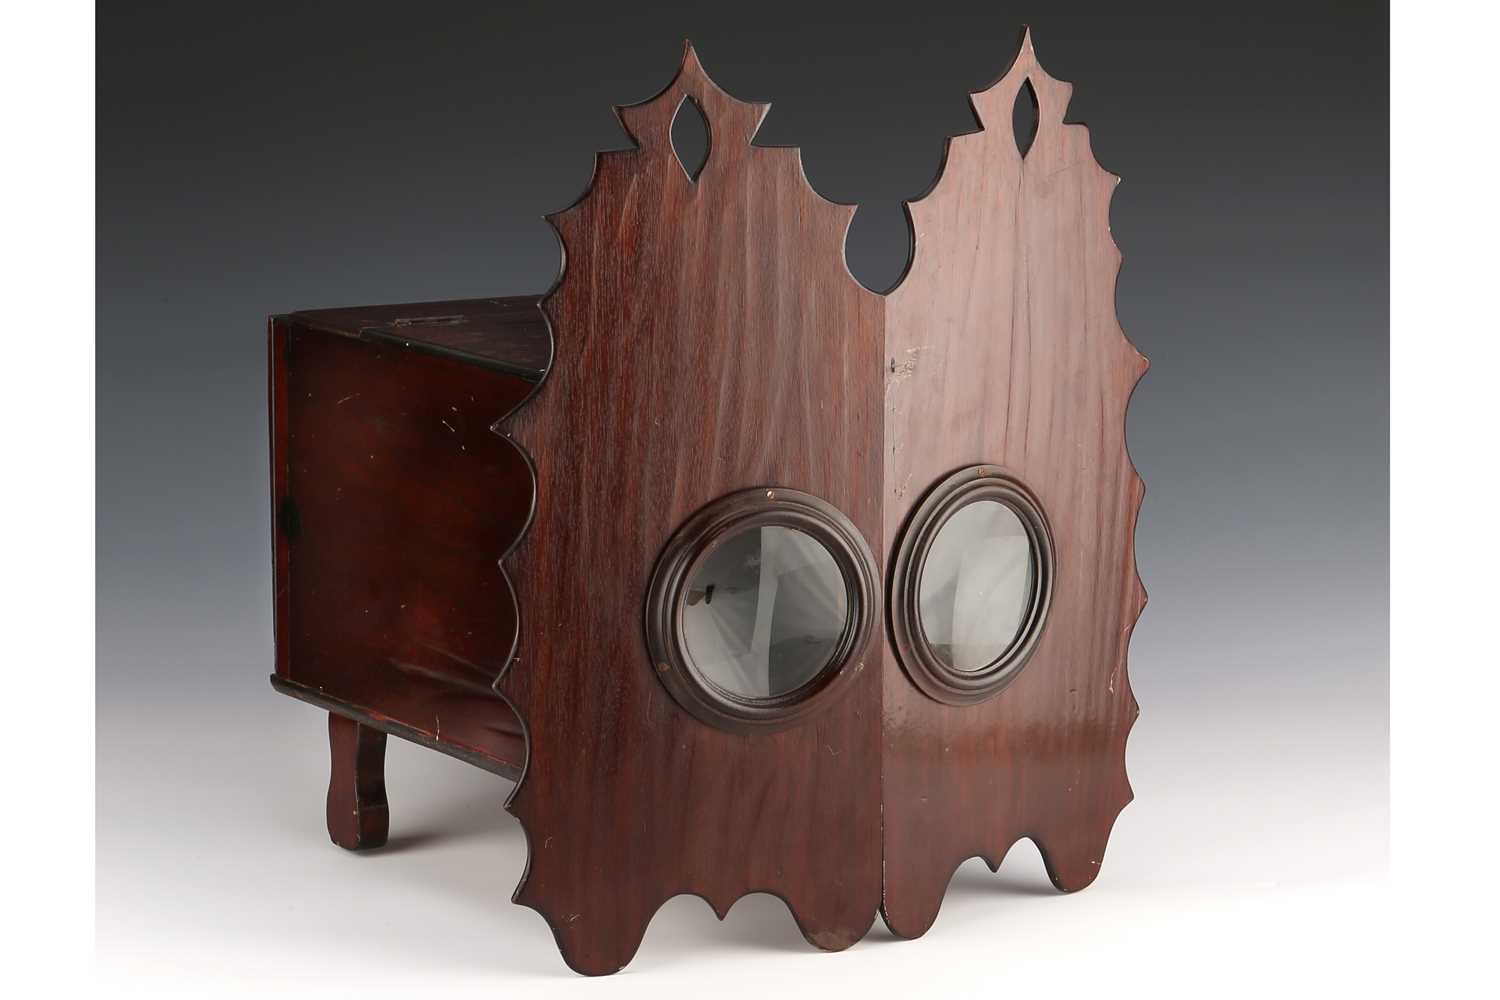 Lot 90 - A Large & Unusual Double Peepshow Viewer